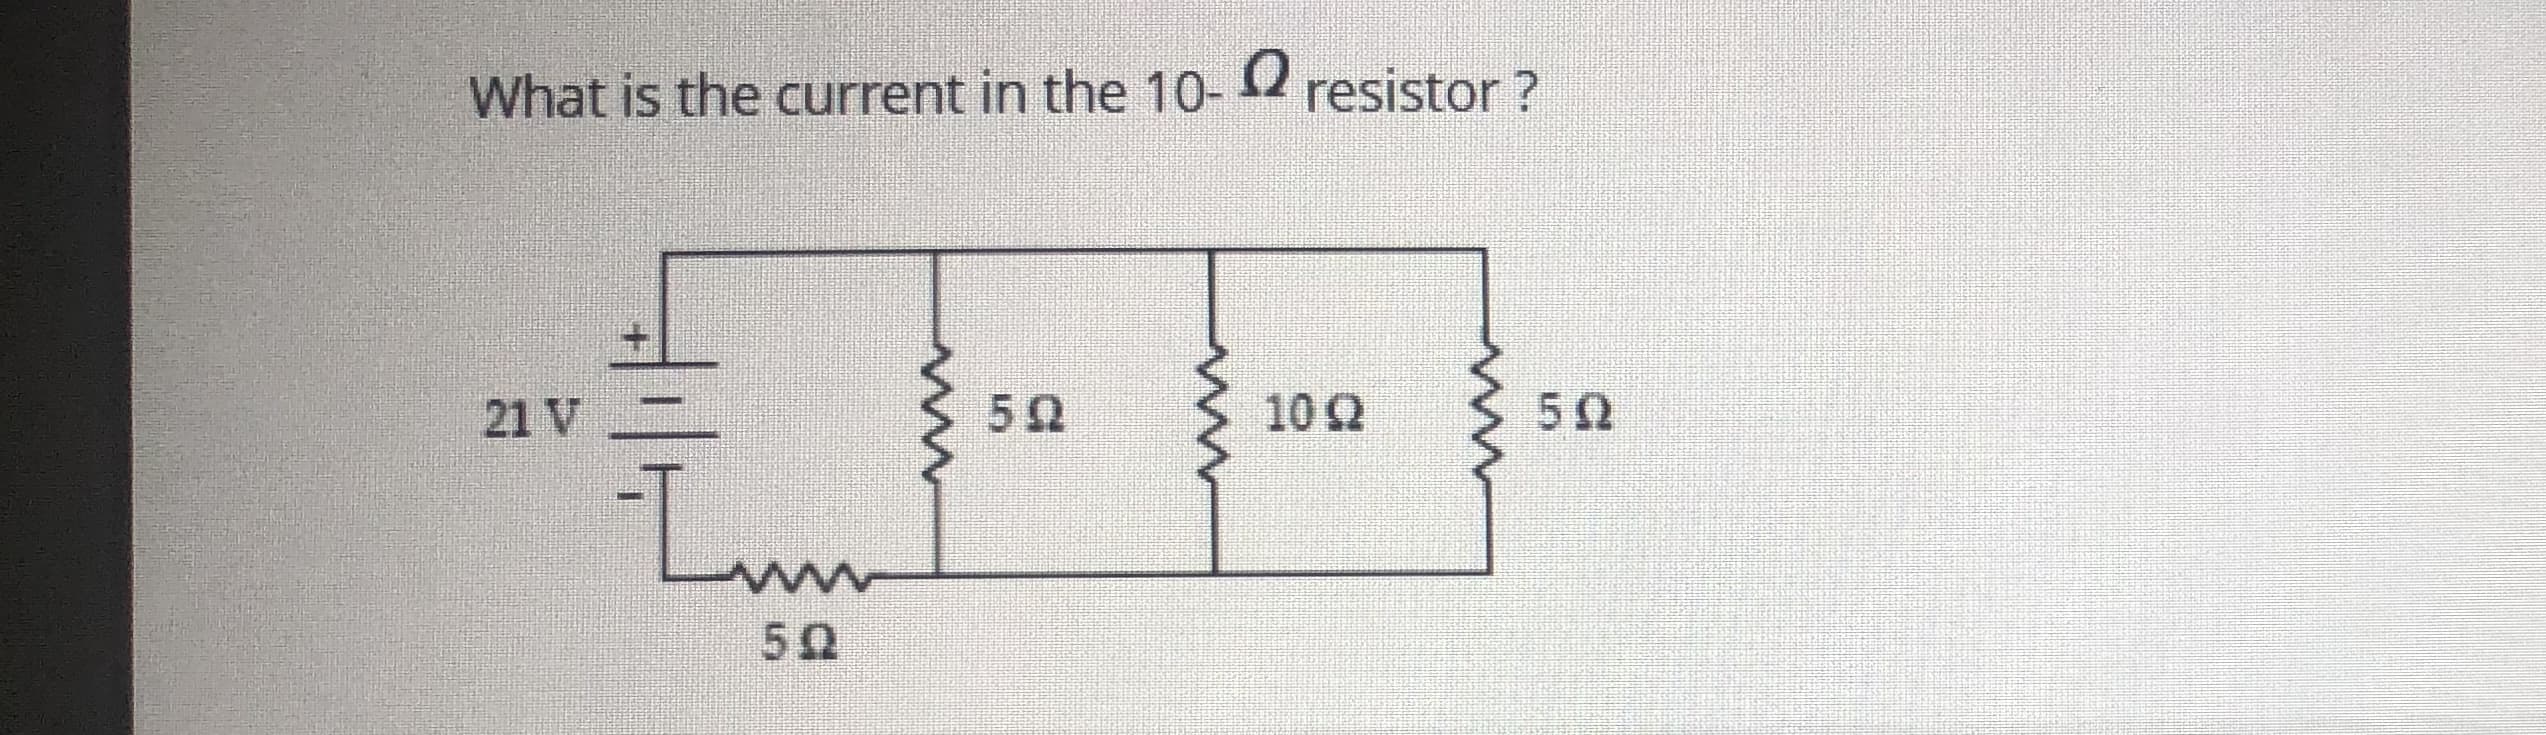 What is the current in the 10- 2 resistor ?
21 V
10 2
52
Lun
50
